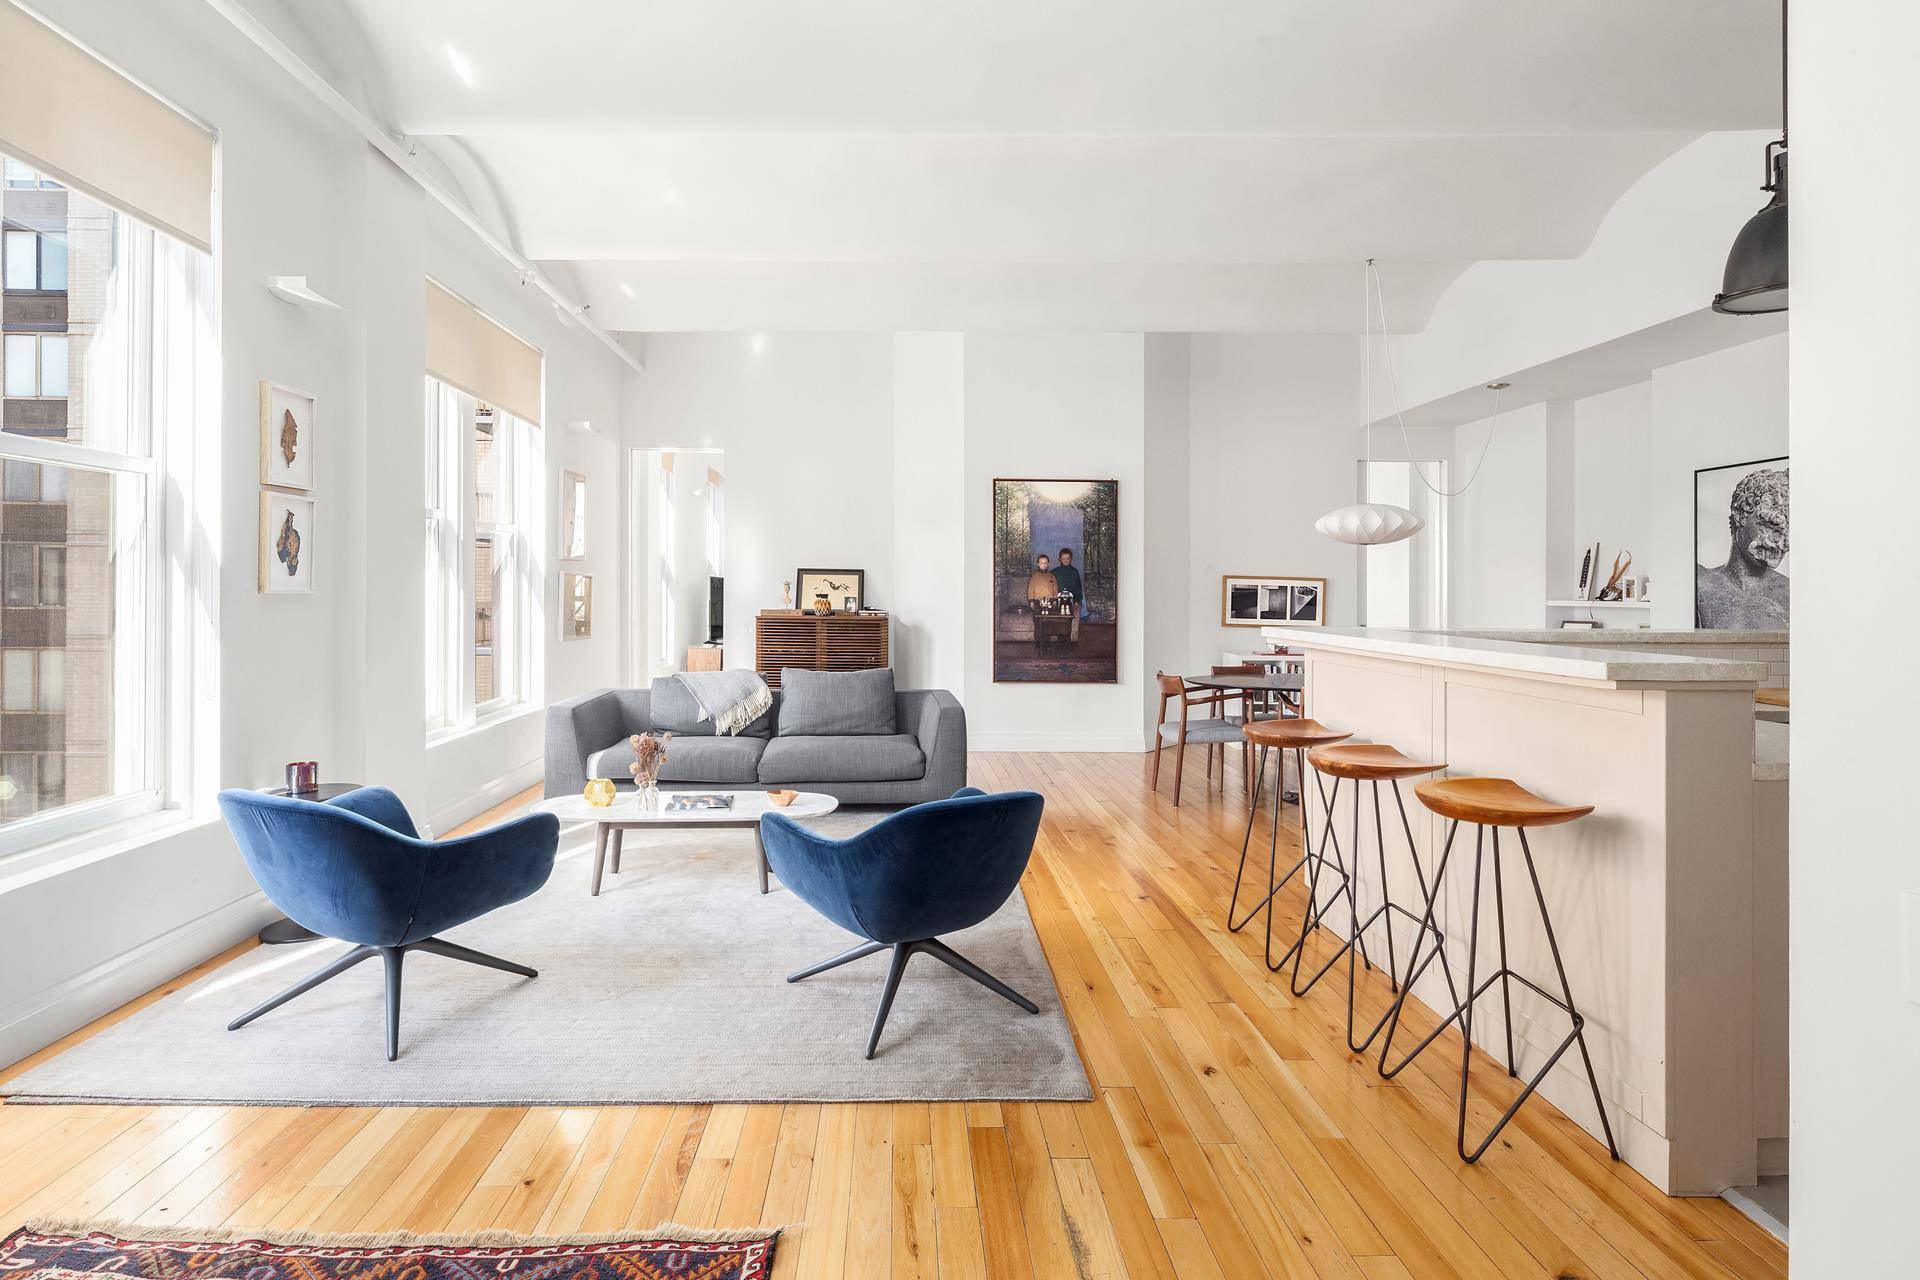 Rarely available this light filled 2000 SF beautiful loft with 11' vaulted ceilings and attractive reclaimed elm floorings is situated on the prettiest tree lined block in the Flat Iron ...